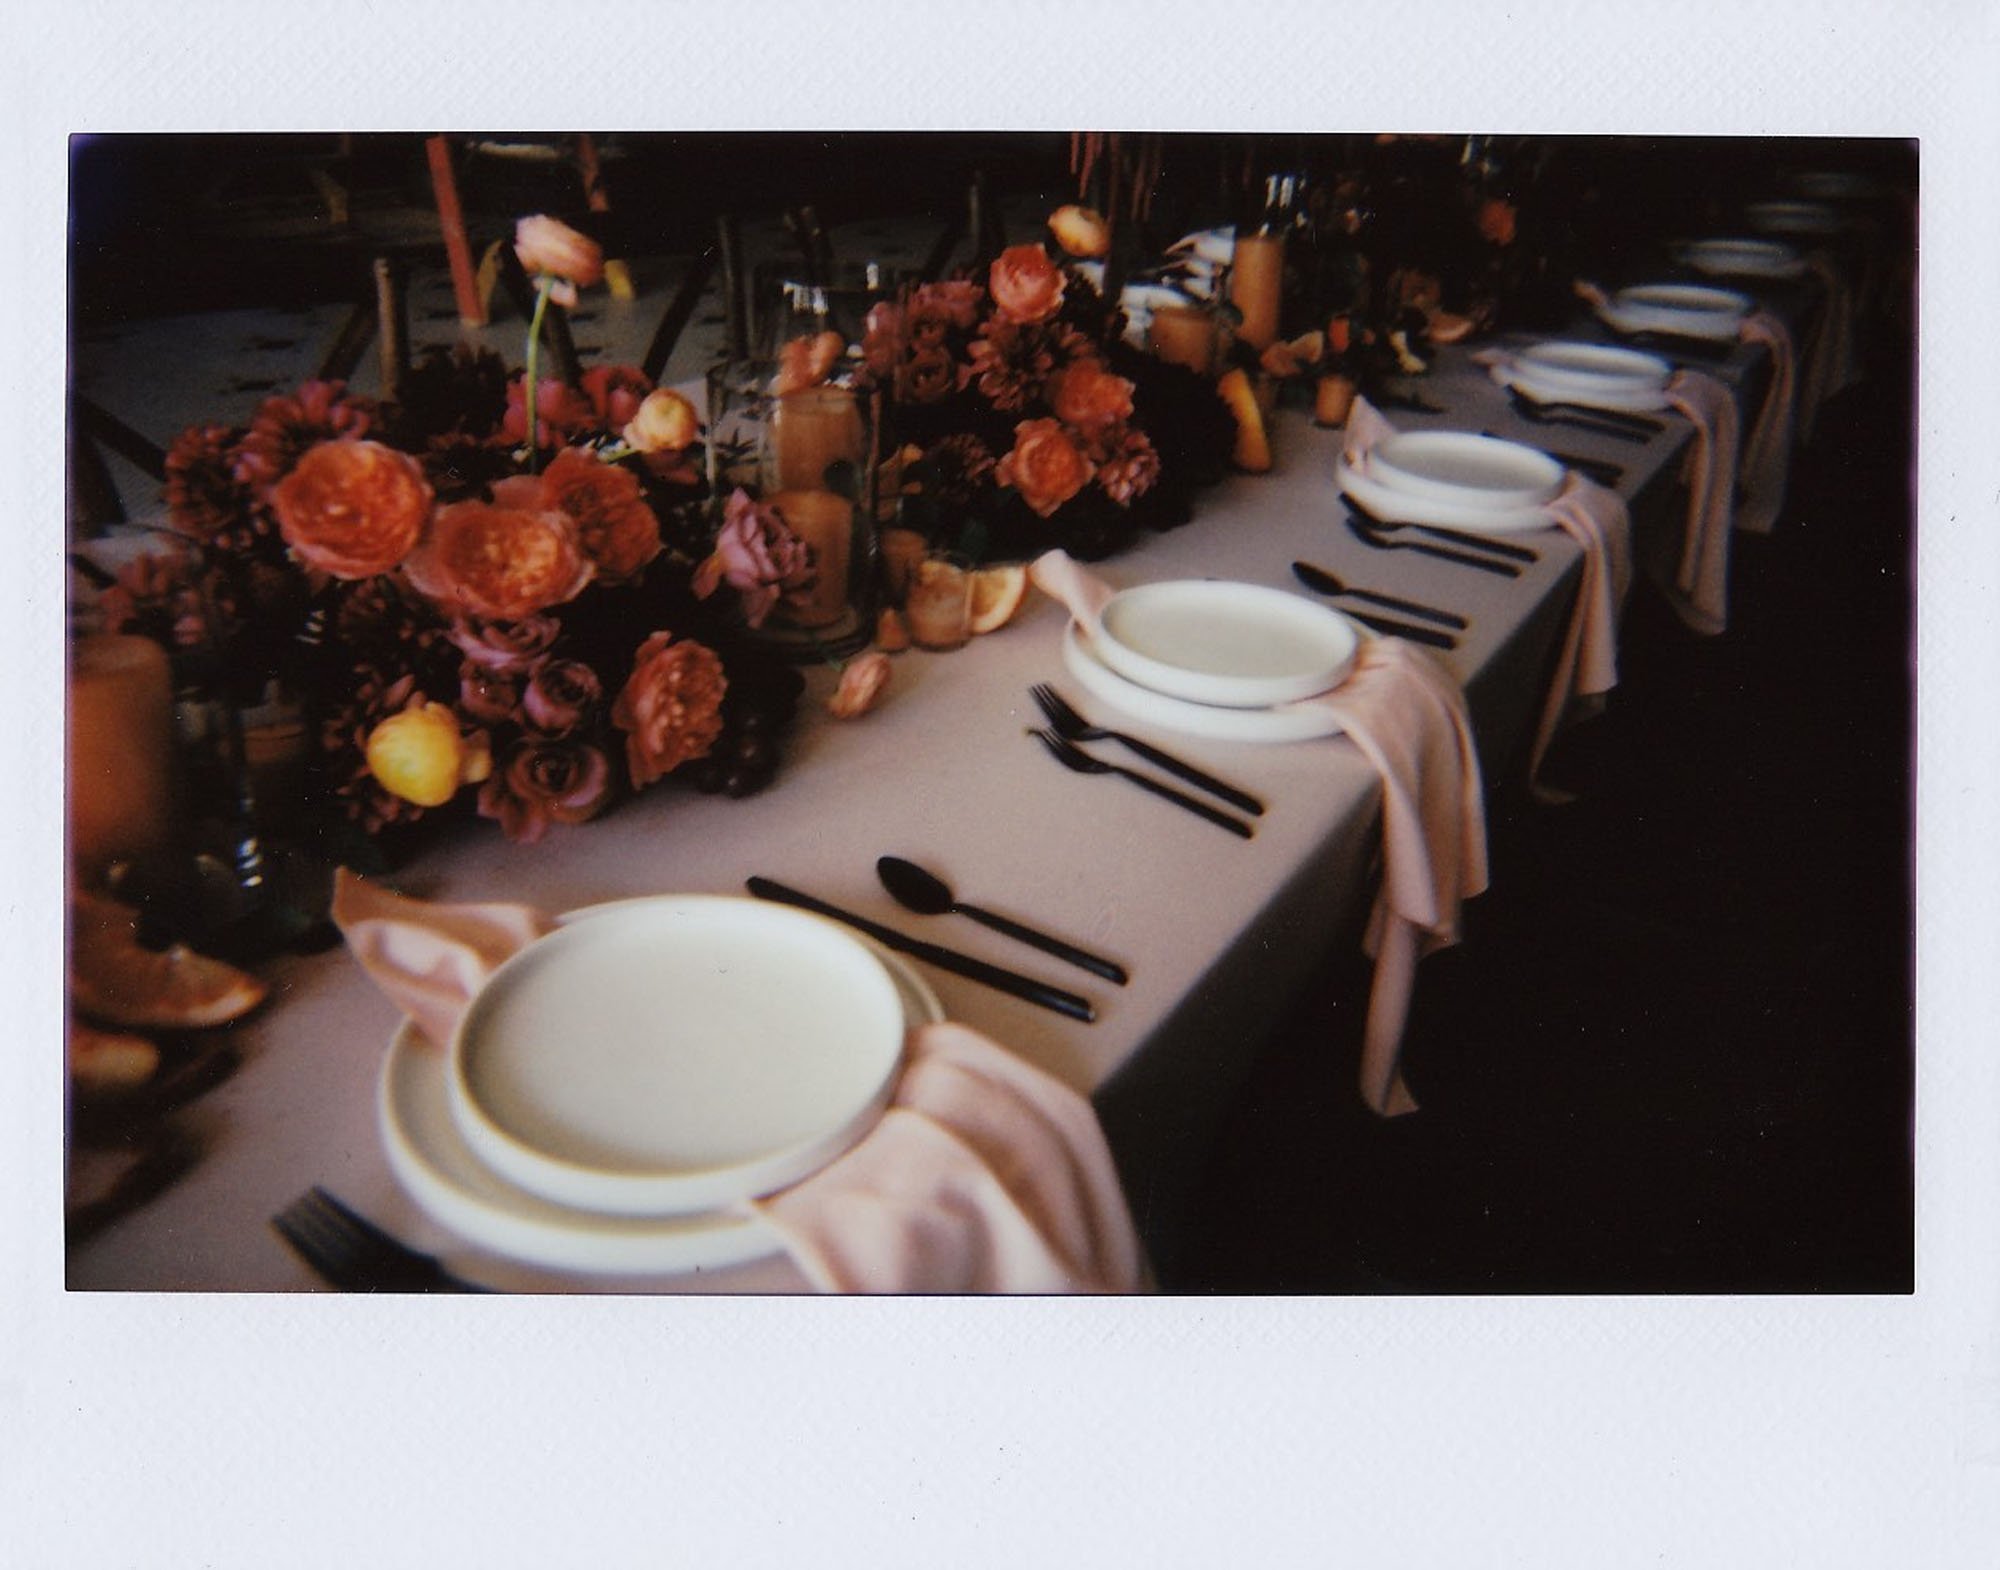  polaroid photo of a colorful and modern wedding table setting, with black flatware, white dinner plates, blush silk napkins, and lush floral centerpieces of burgundy, pink, orange, and red. 